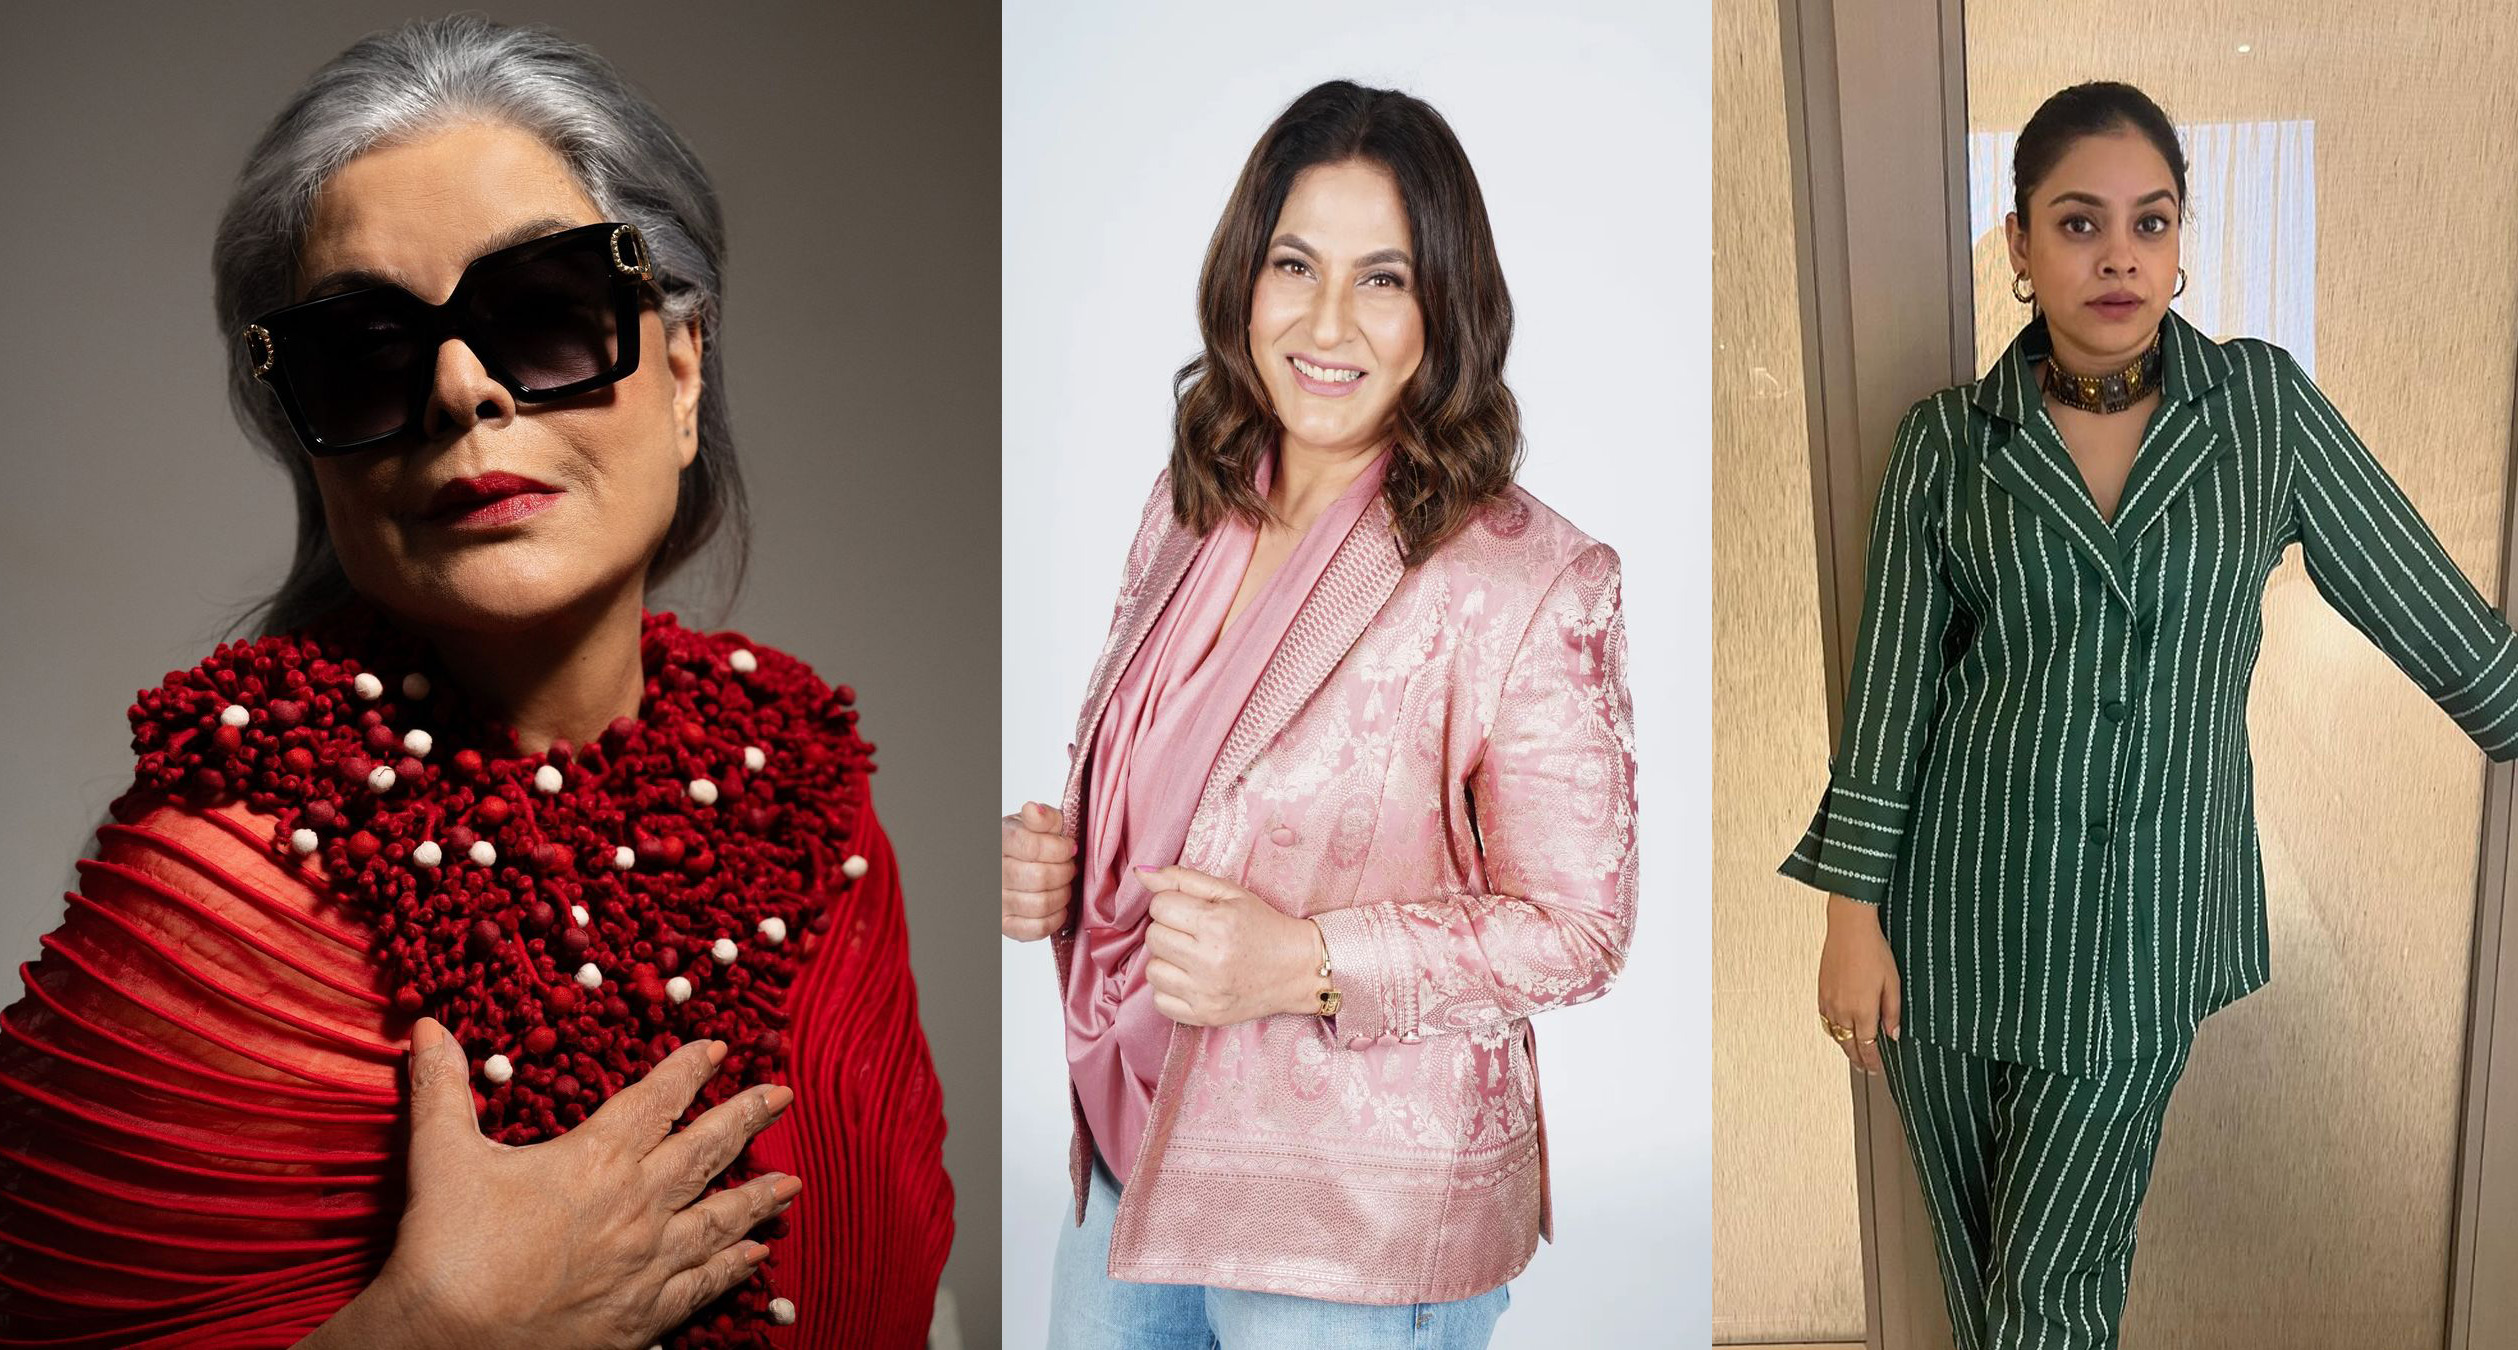 Iconic Bollywood Actress Zeenat Aman Stirred Up The Internet With A Recent Post On Social Media. See How Our Celebrities, Archana Puran Singh And Sumona Chakravarti, Wish More Power To Actresses!